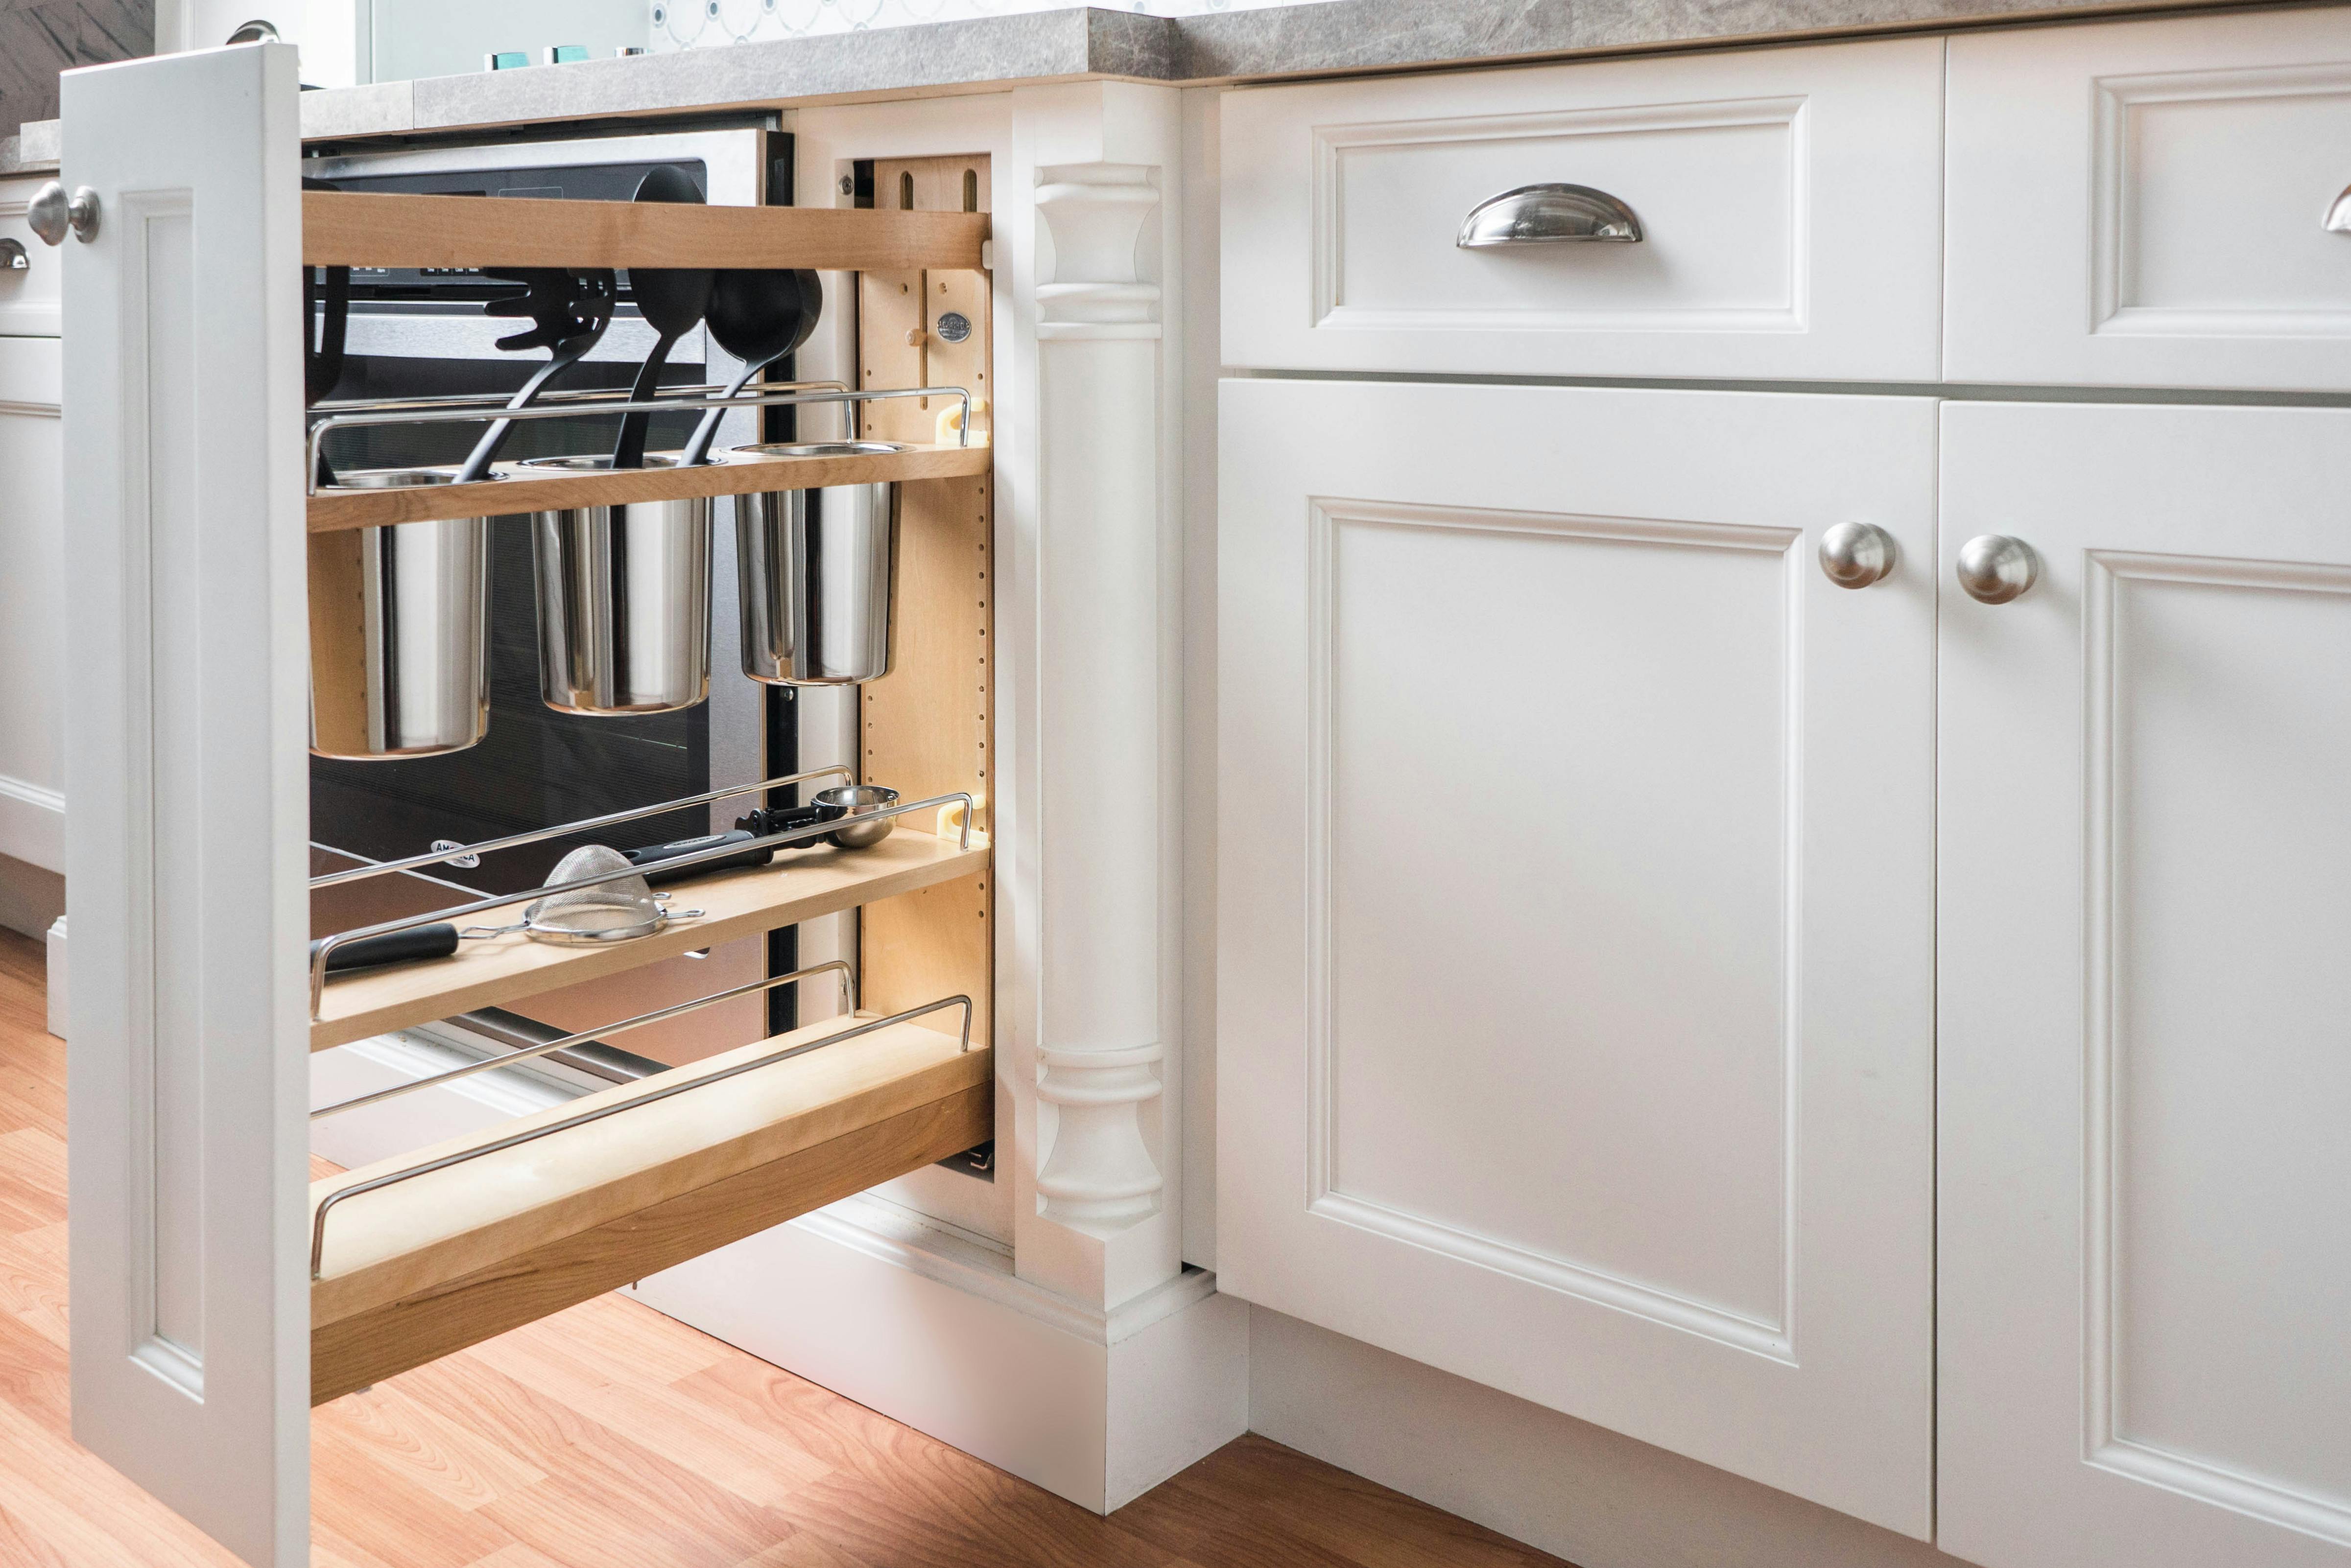 Cabinet accessories that will transform your kitchen